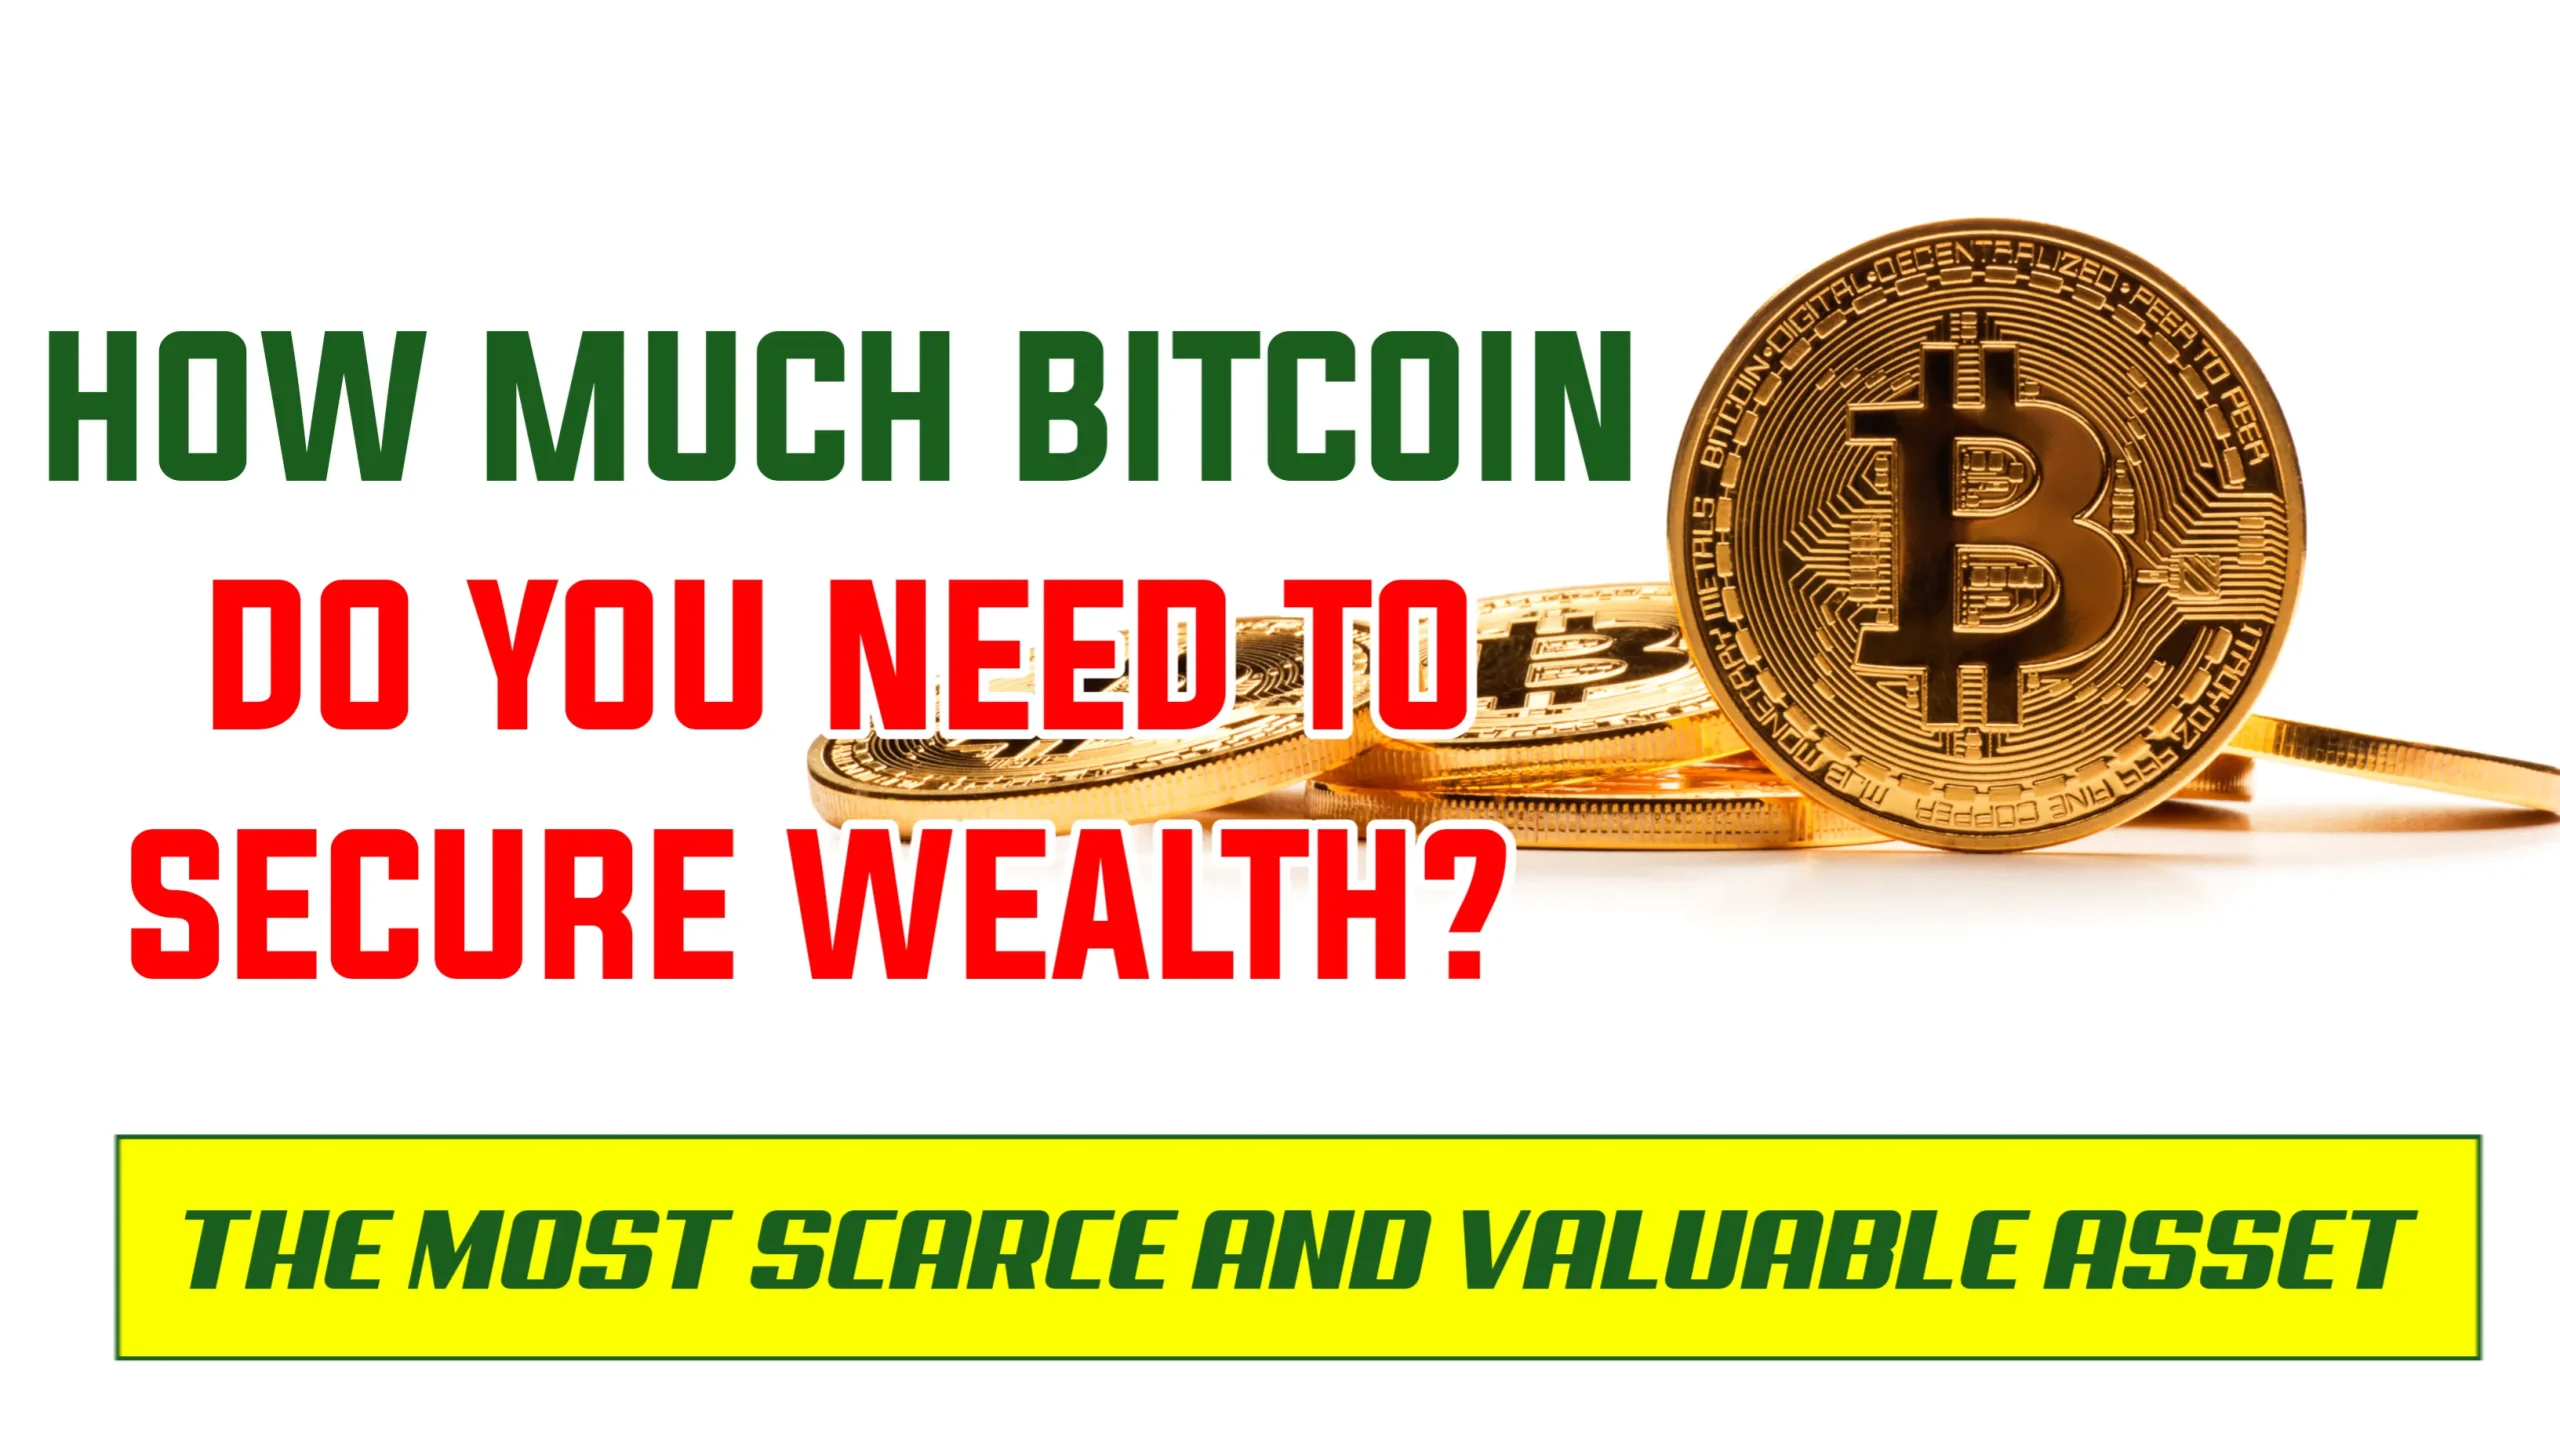 How Much Bitcoin Do You Need to Secure Wealth The Most Scarce and Valuable Asset